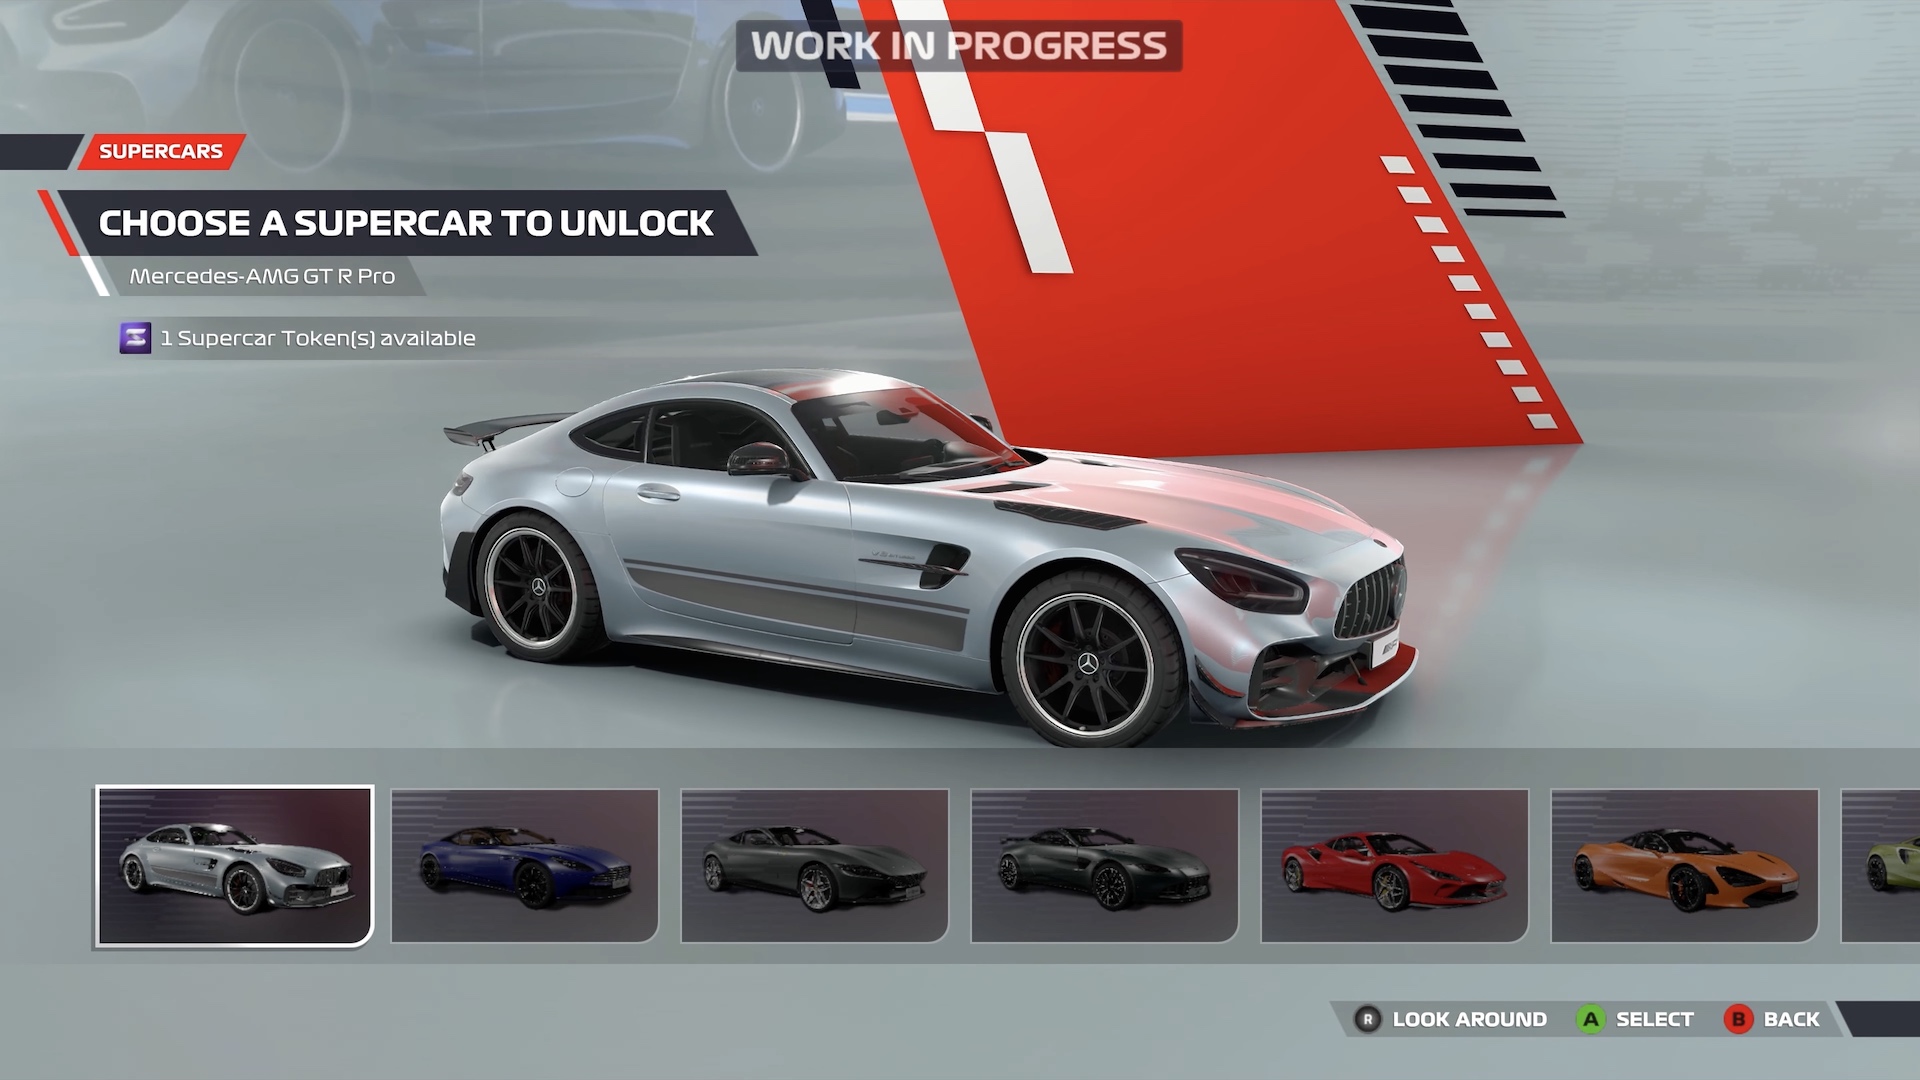 New F1 22 Game Lets You Drive Supercars on Grand Prix Tracks